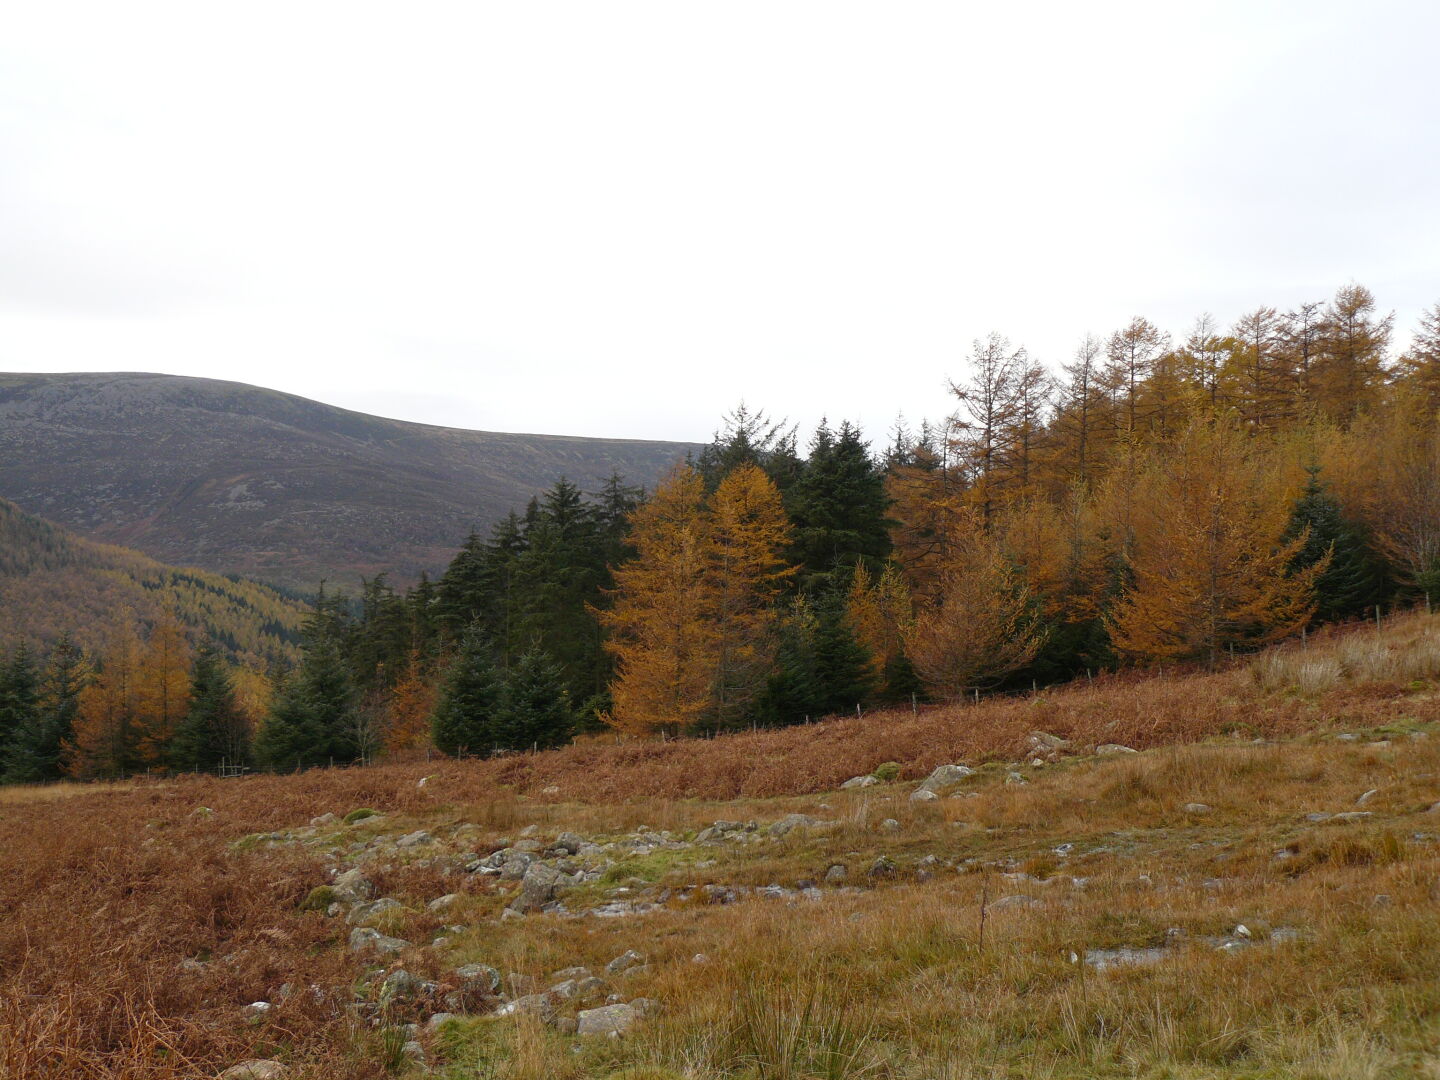 Autumn colours in the valley of River Liza, into which we proceeded from the Red Pike...